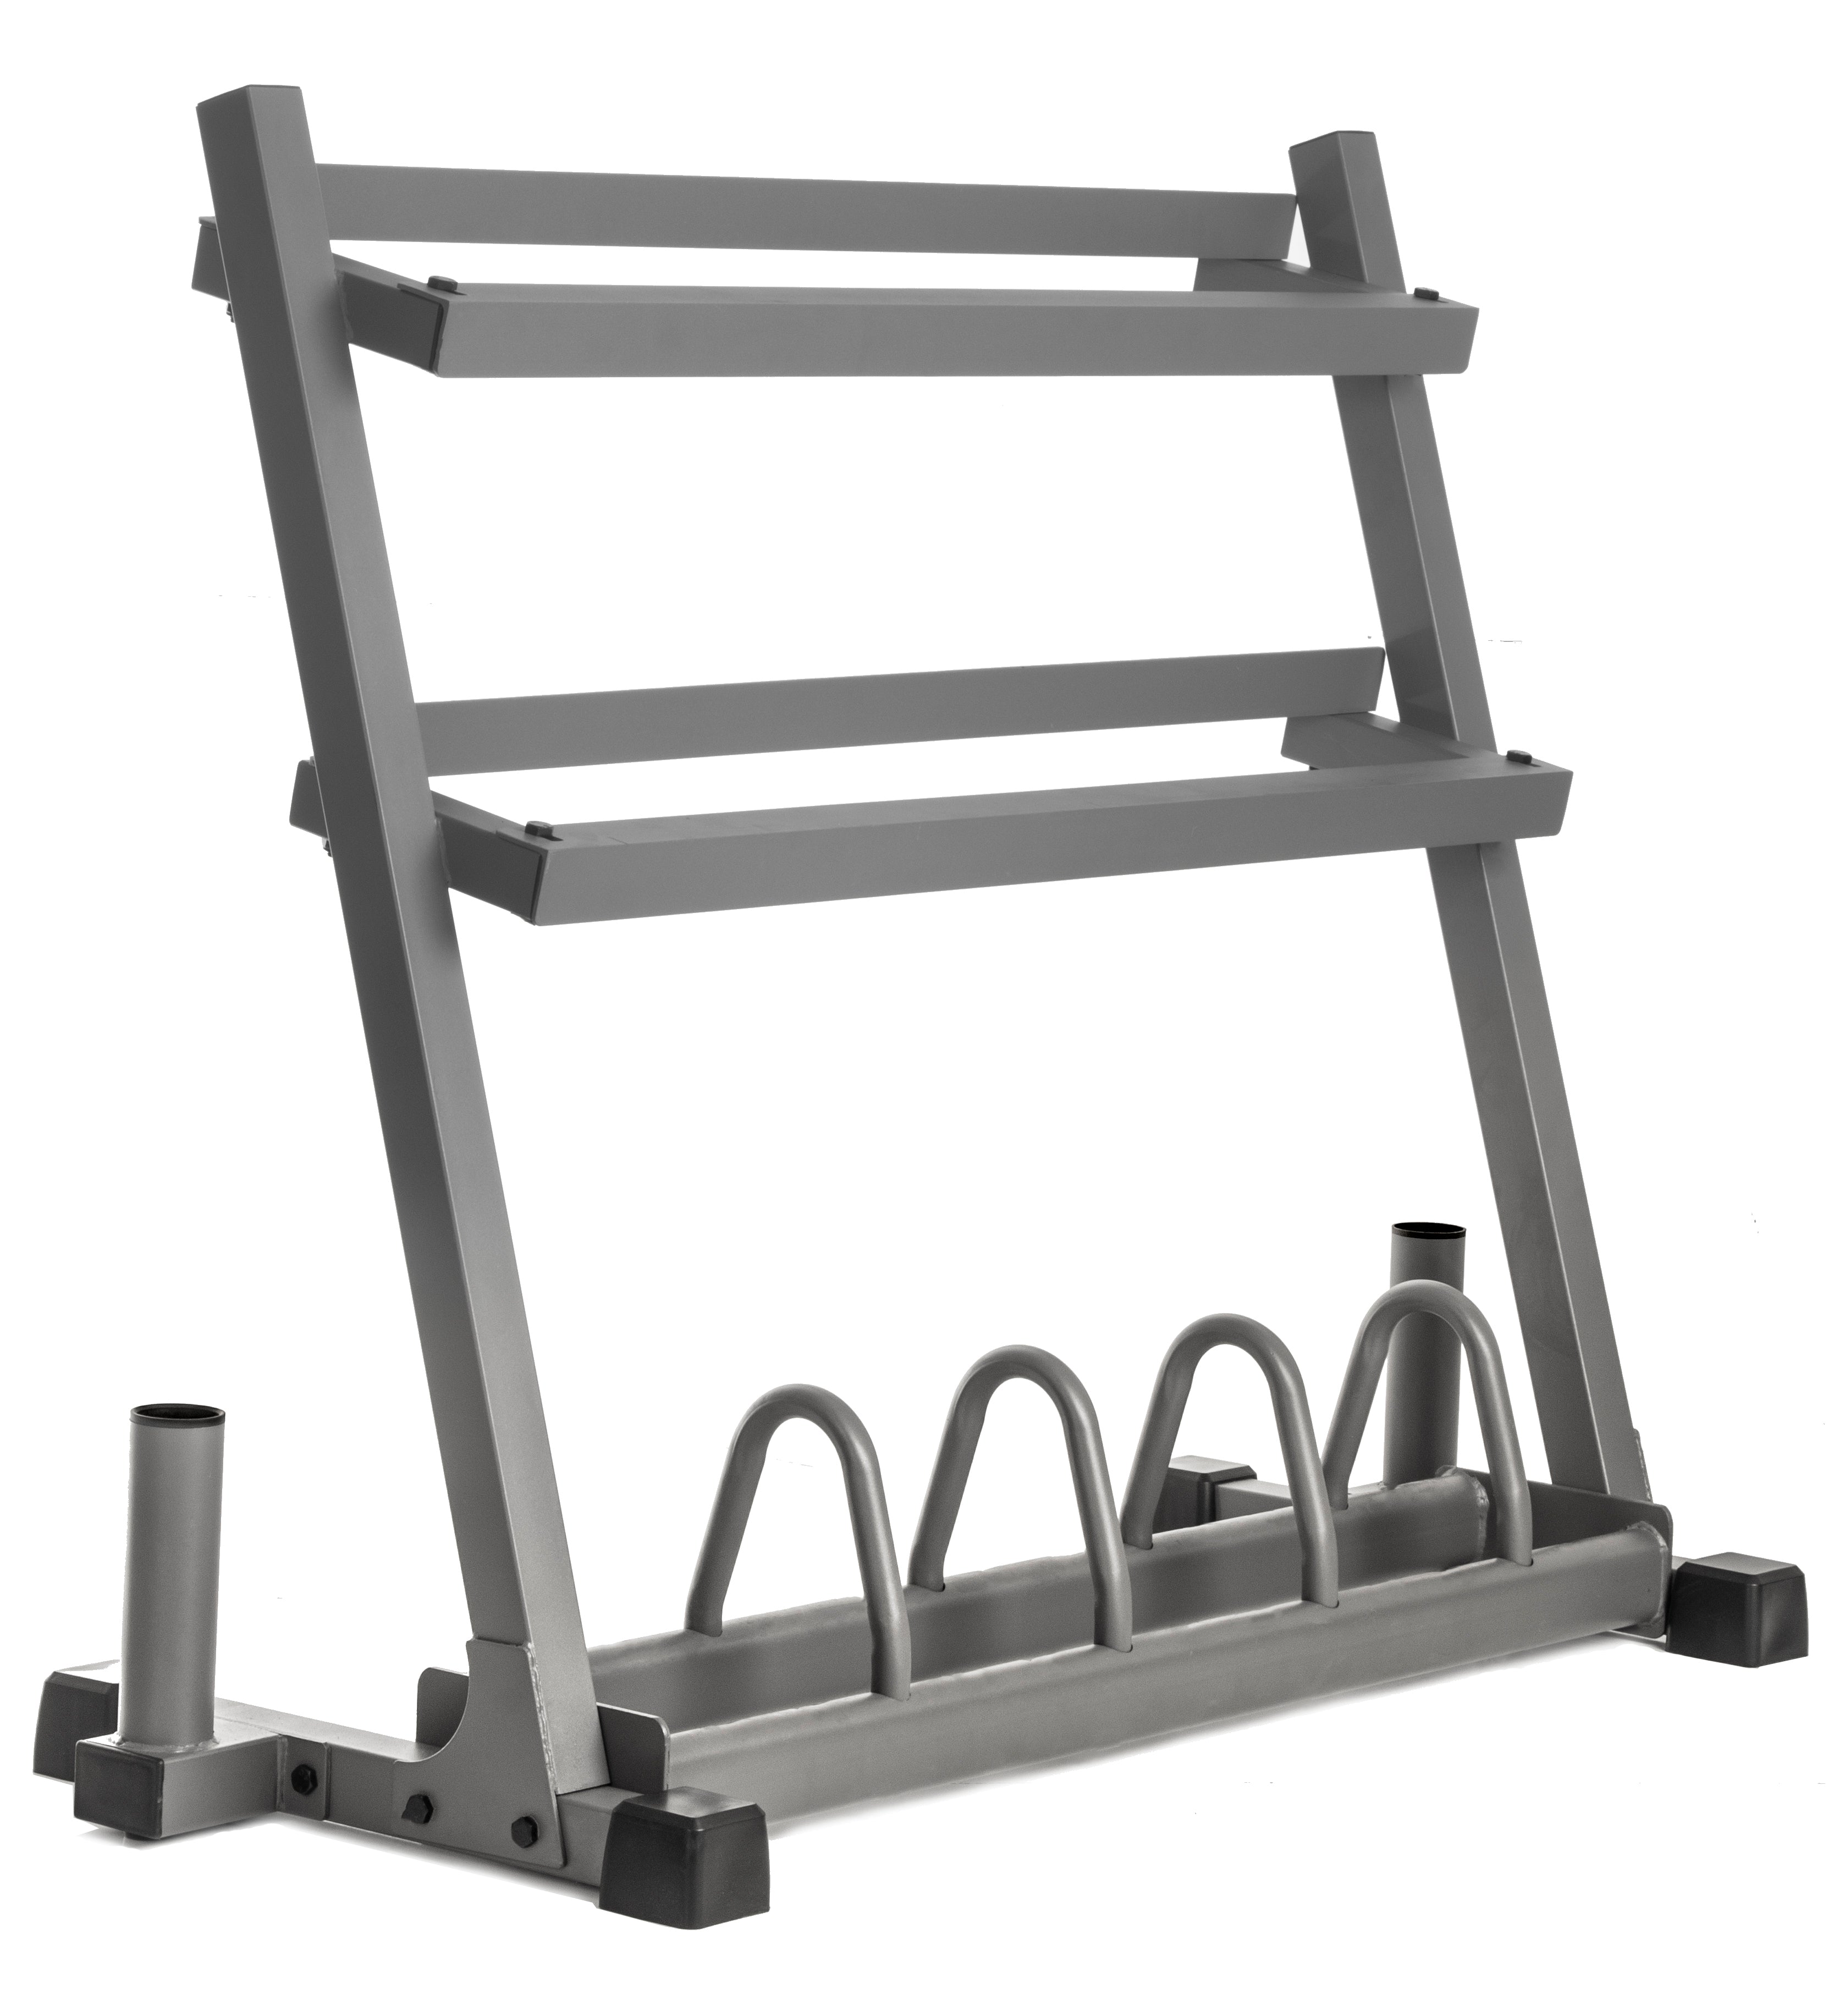 Dumbbell, Barbell, and Weight Plate Storage Rack